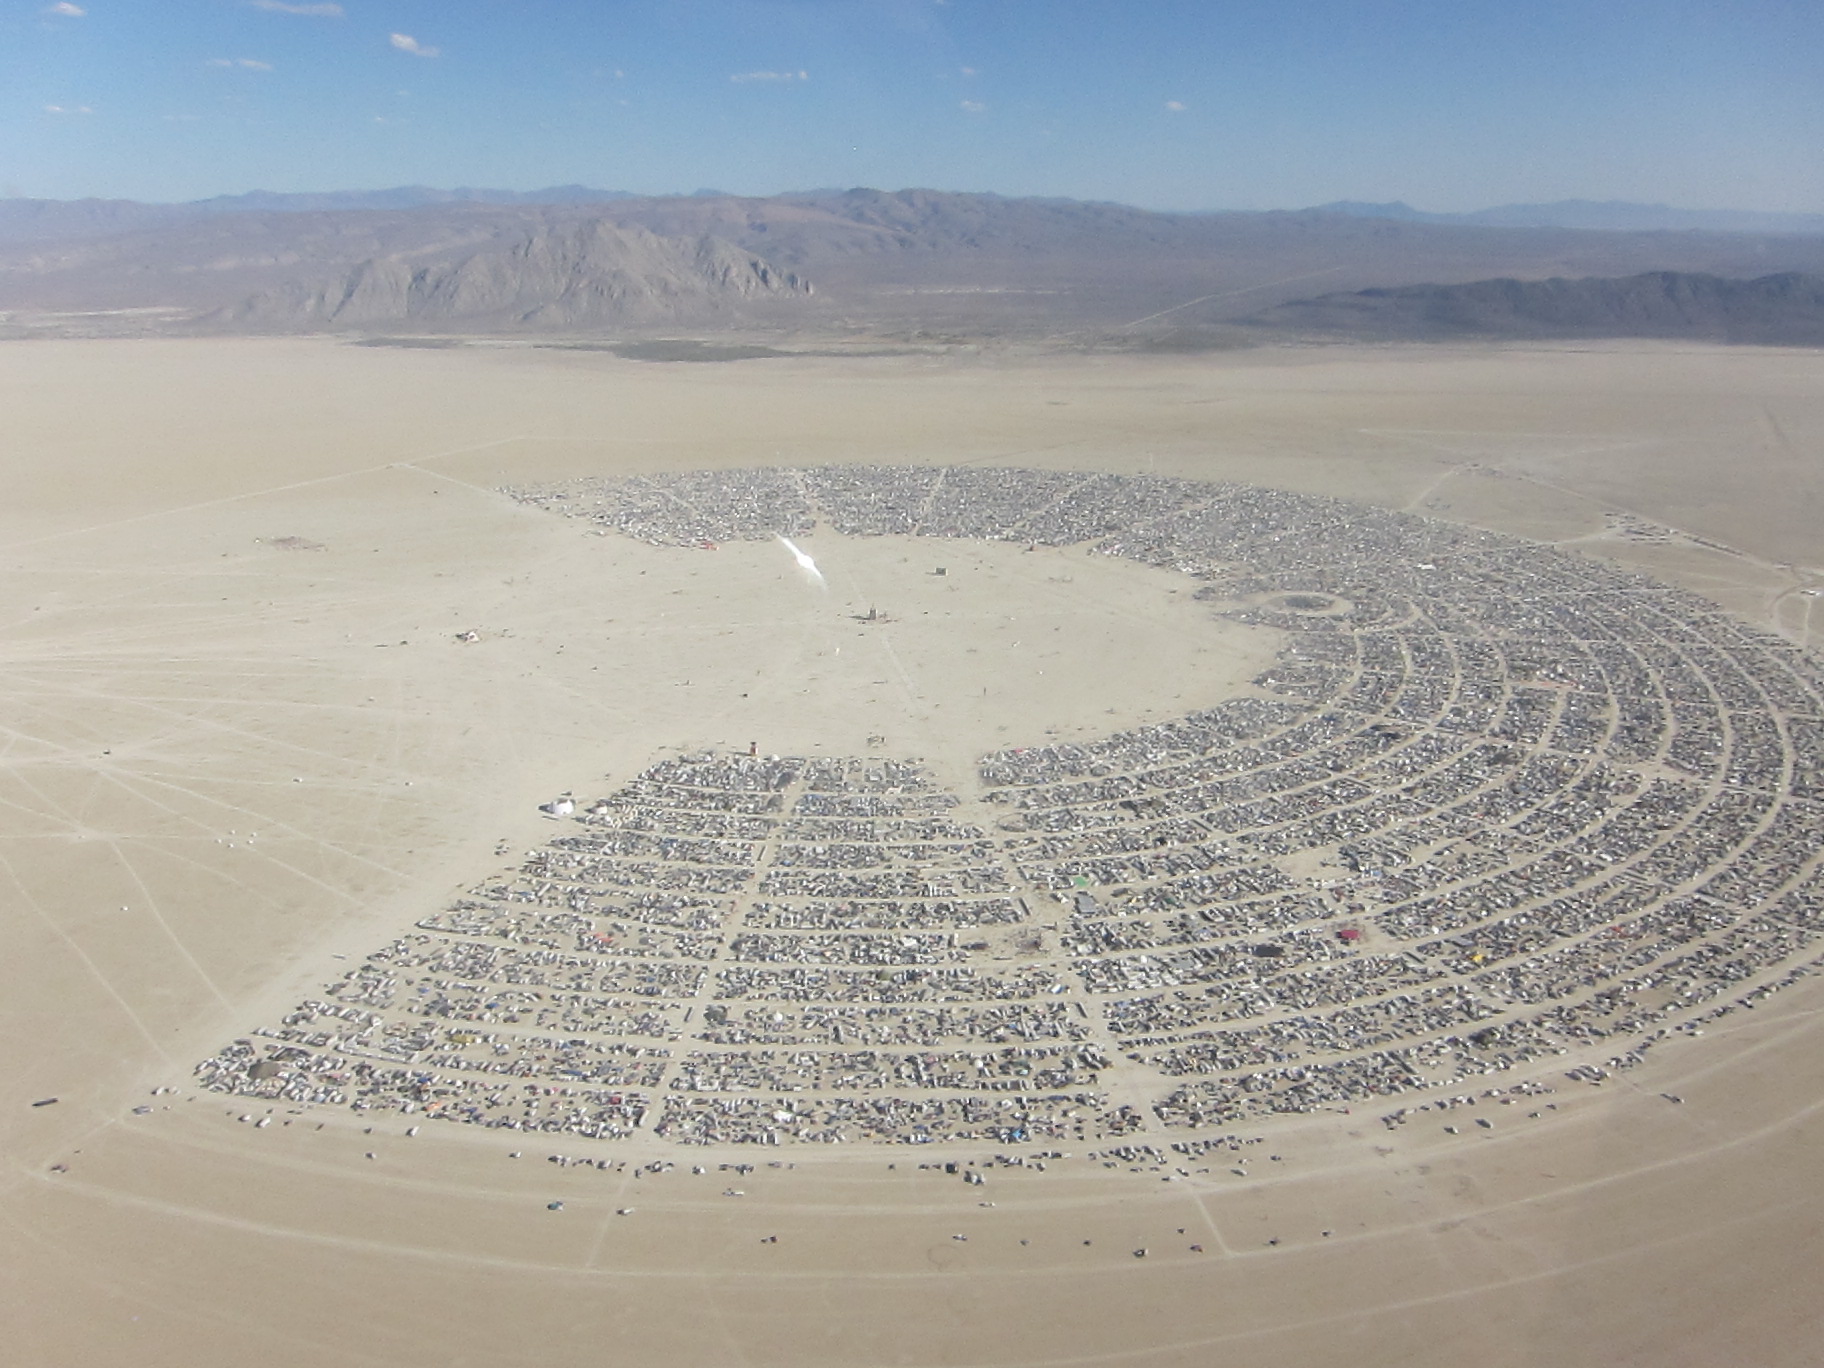 Authorities investigate death during floods at Burning Man